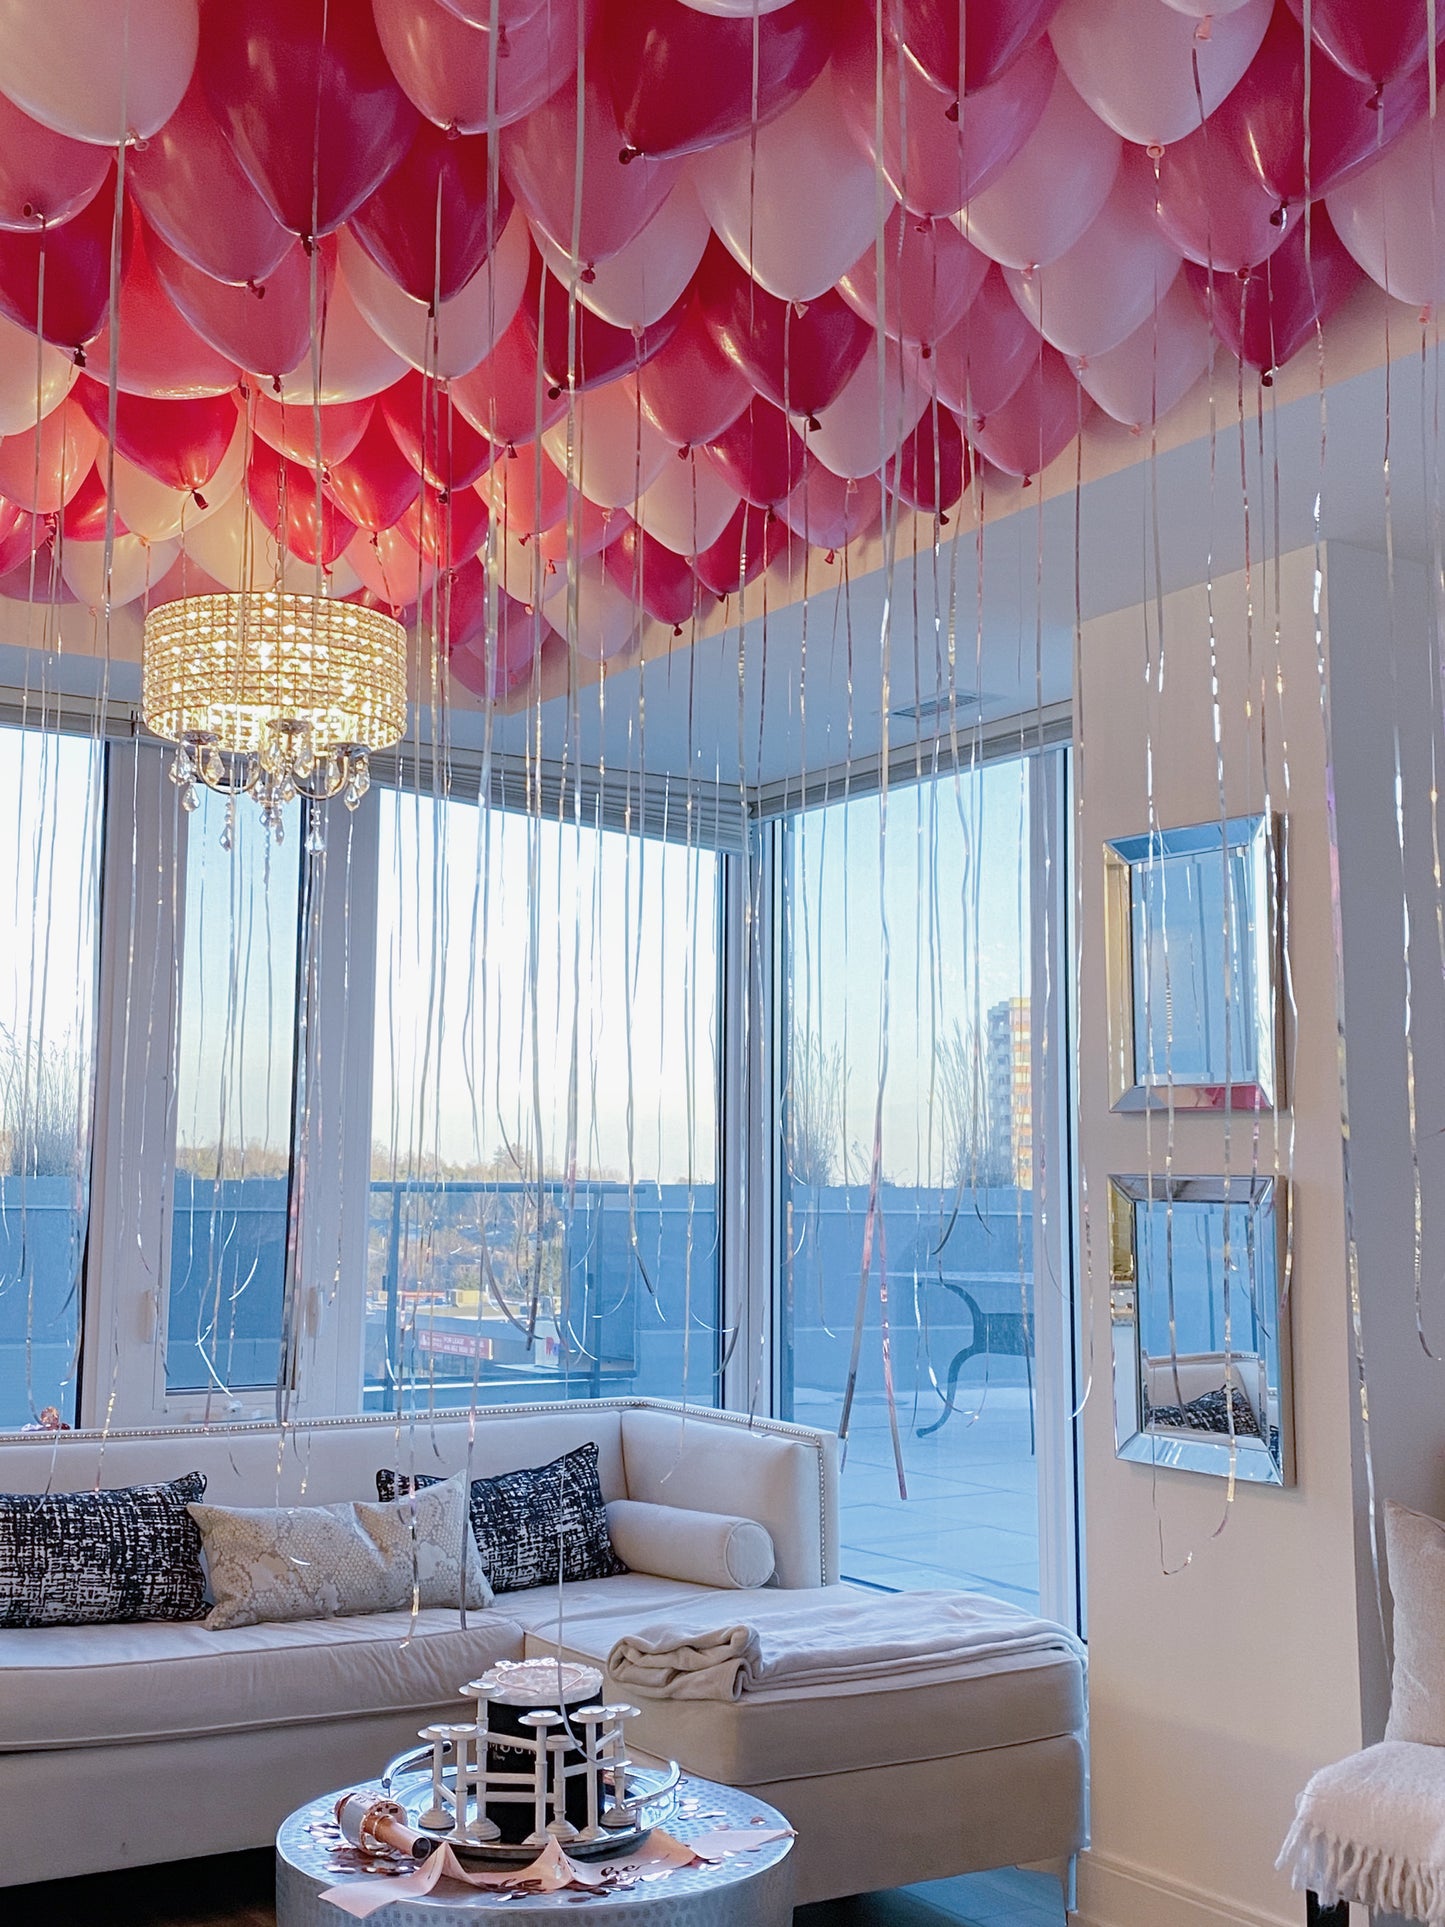 CEILING BALLOONS ✨